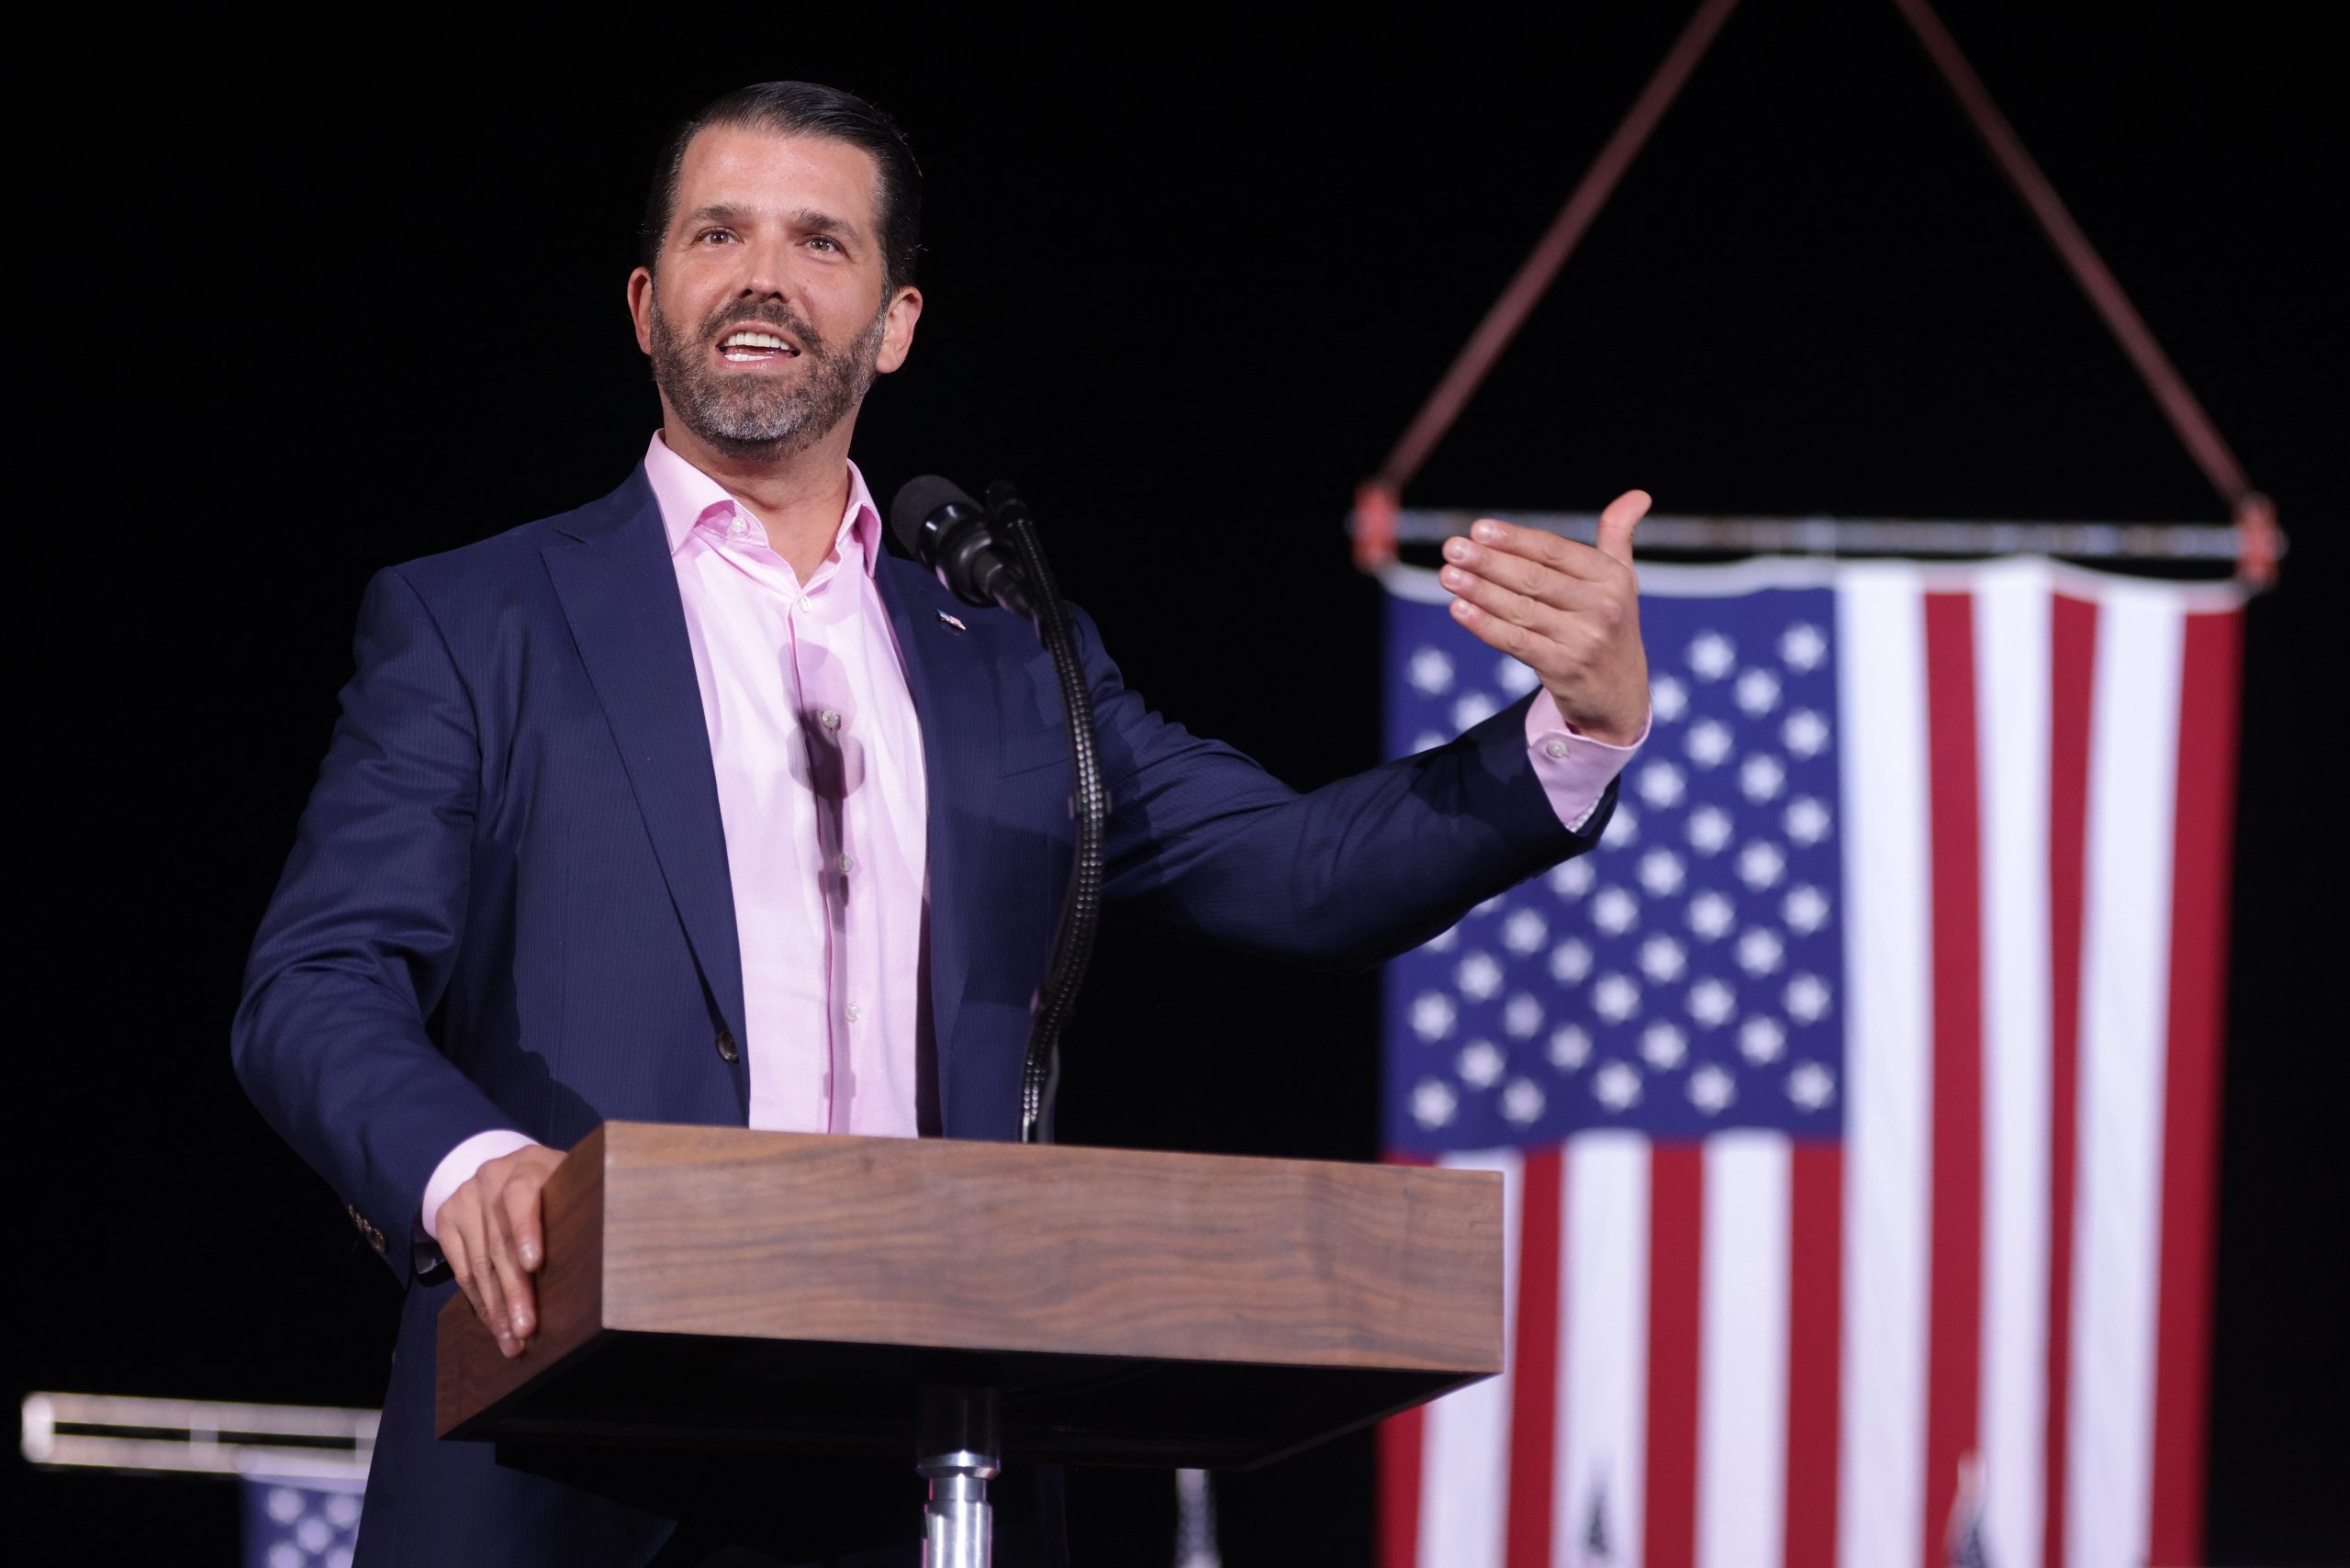 Donald Trump Jr stands at pulpit in front of American flag